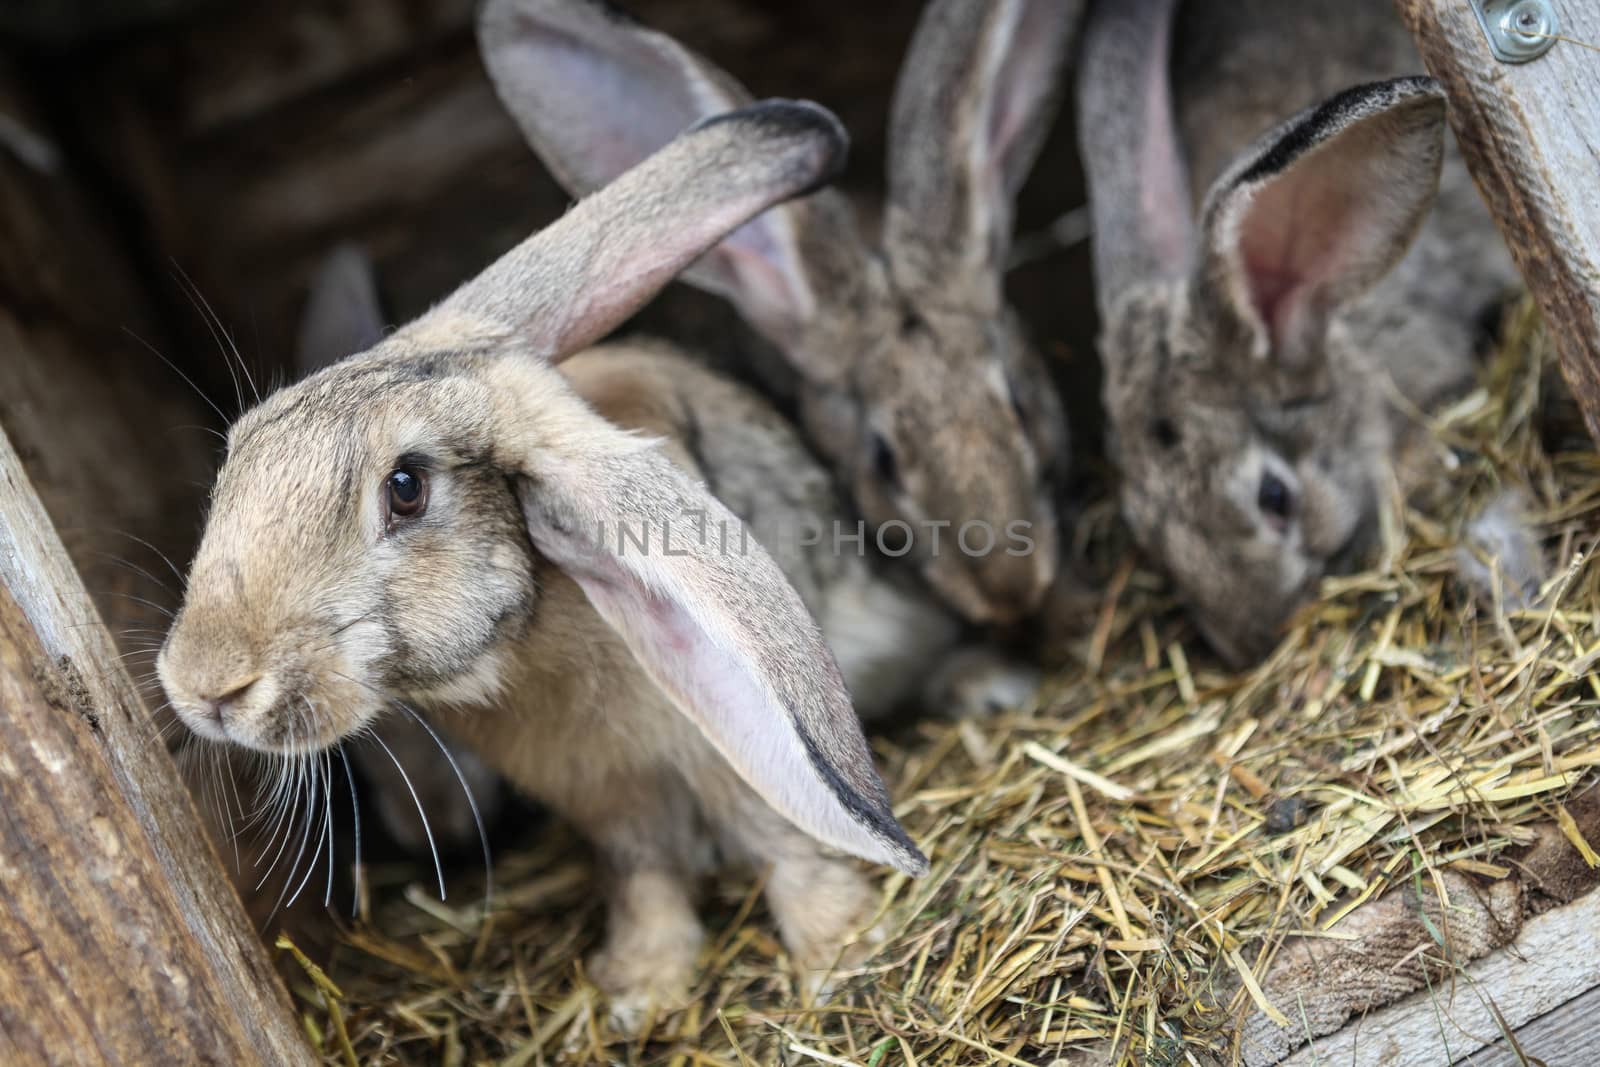 Rabbits in a hutch by bayberry